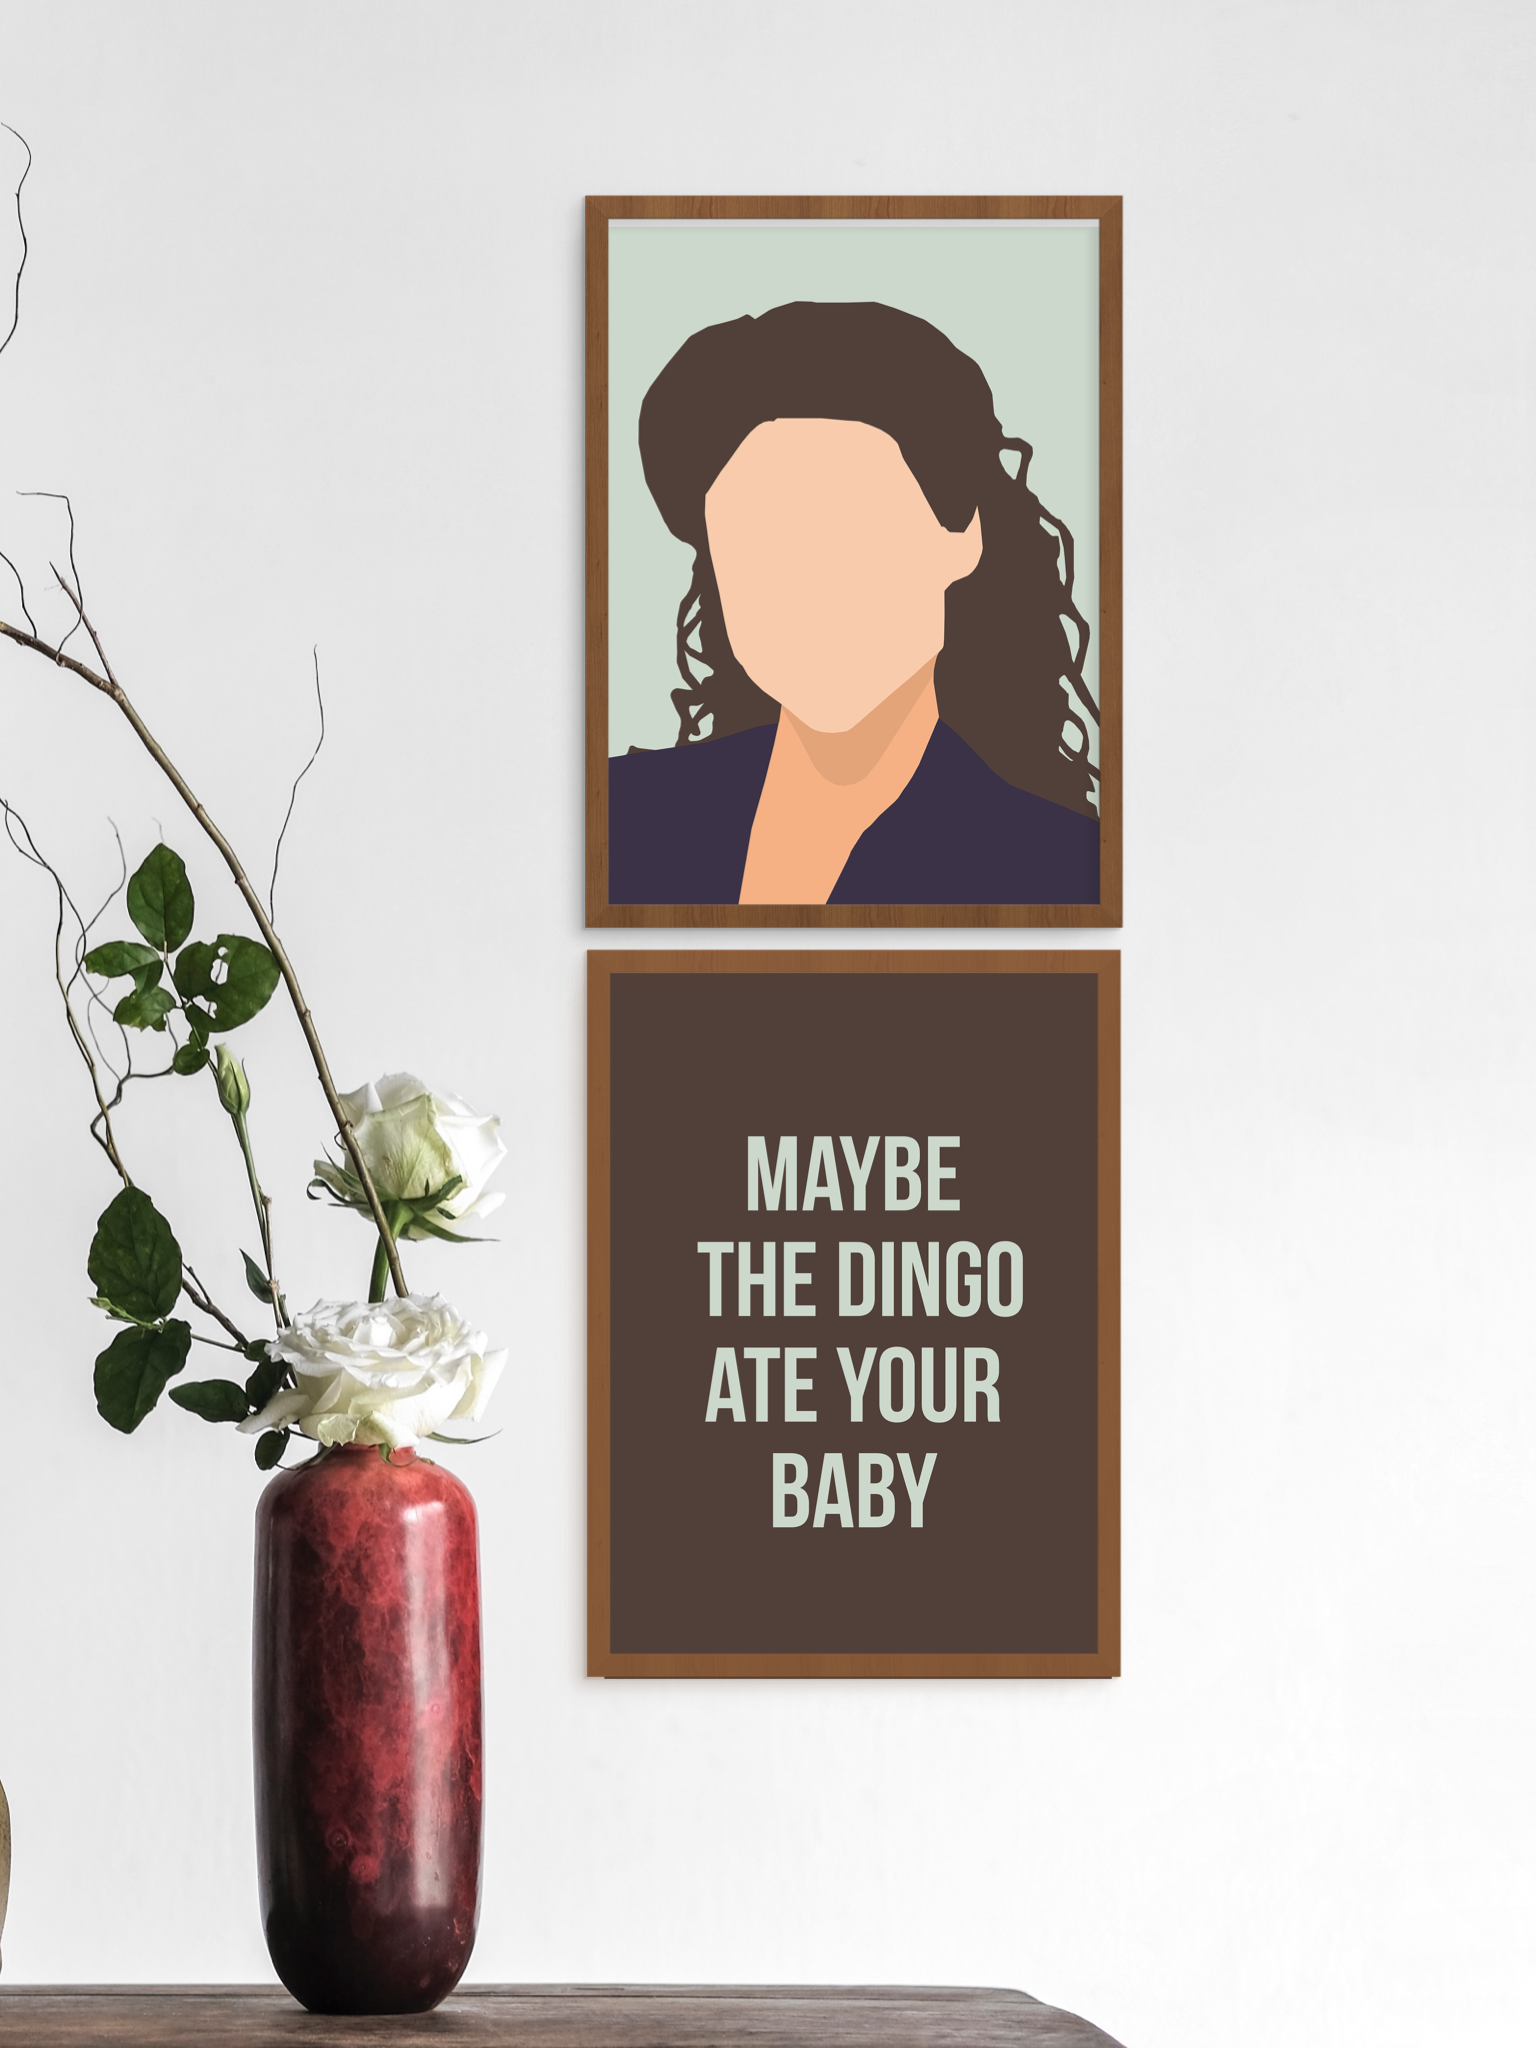 Elaine Benes from Seinfeld tv show art print set with minimal portrait and funny quote from tv show